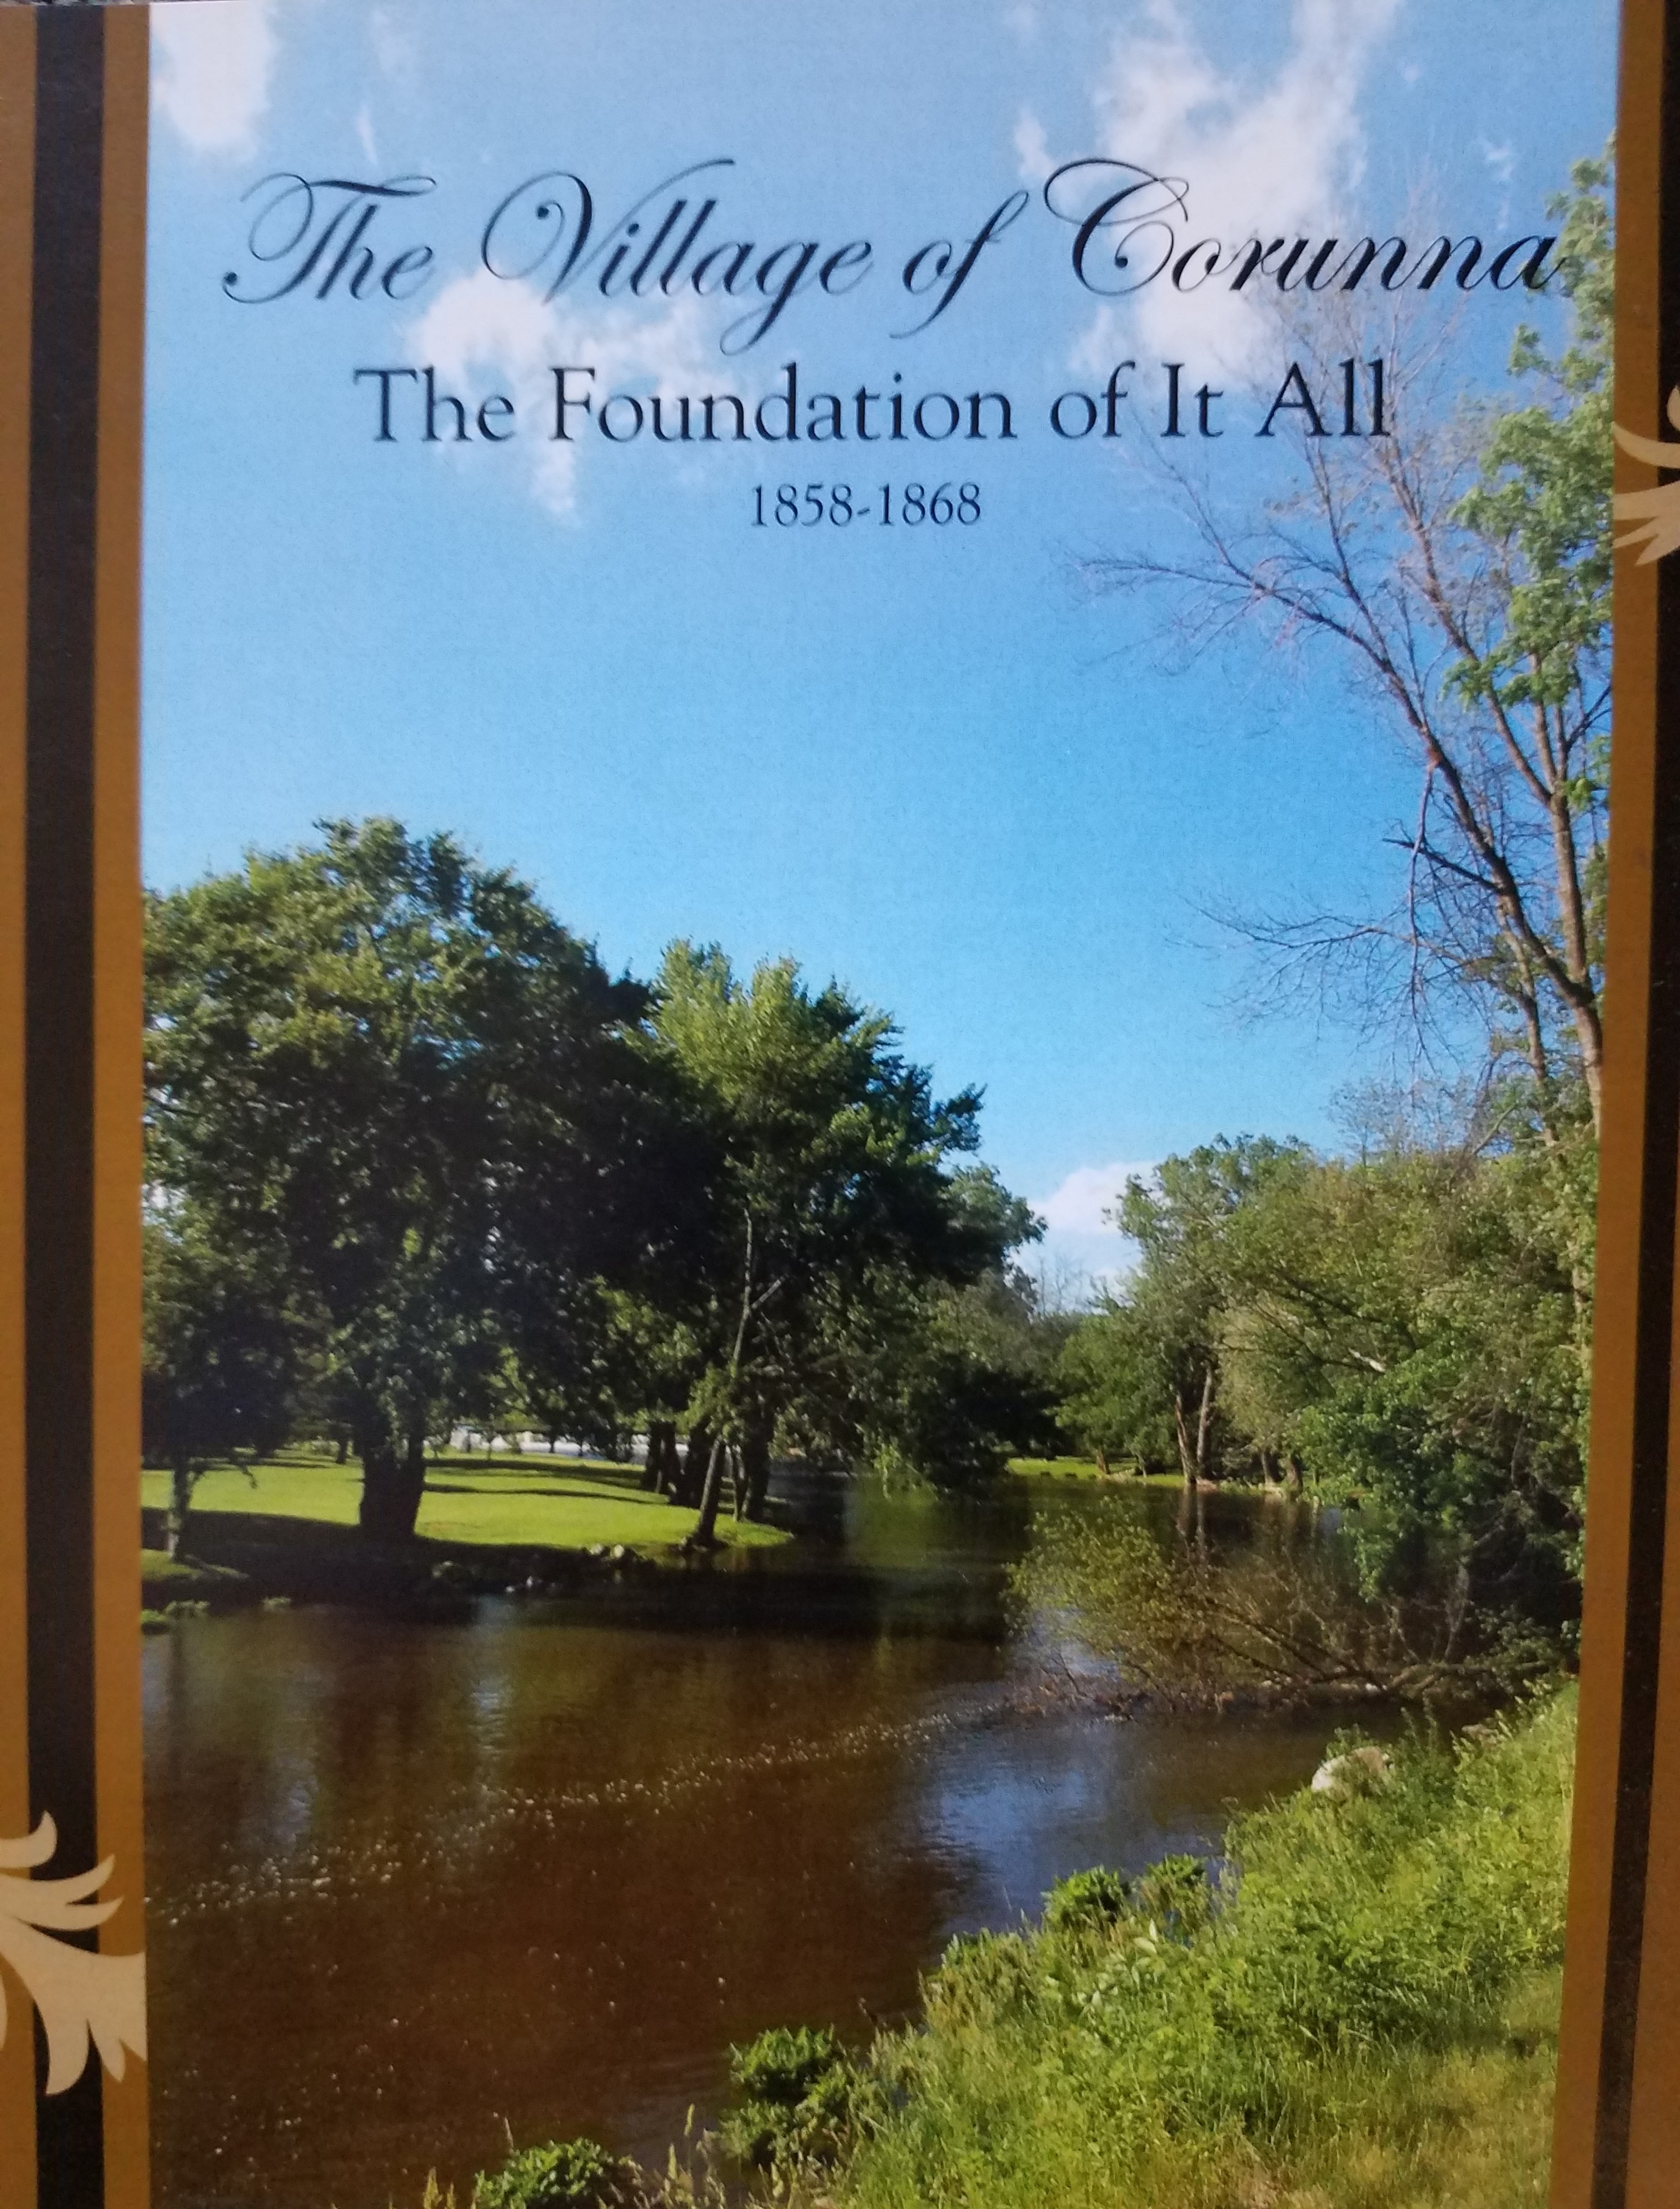 The Village of Corunna, Foundations of it all book cover with photo of the Shiawassee River.